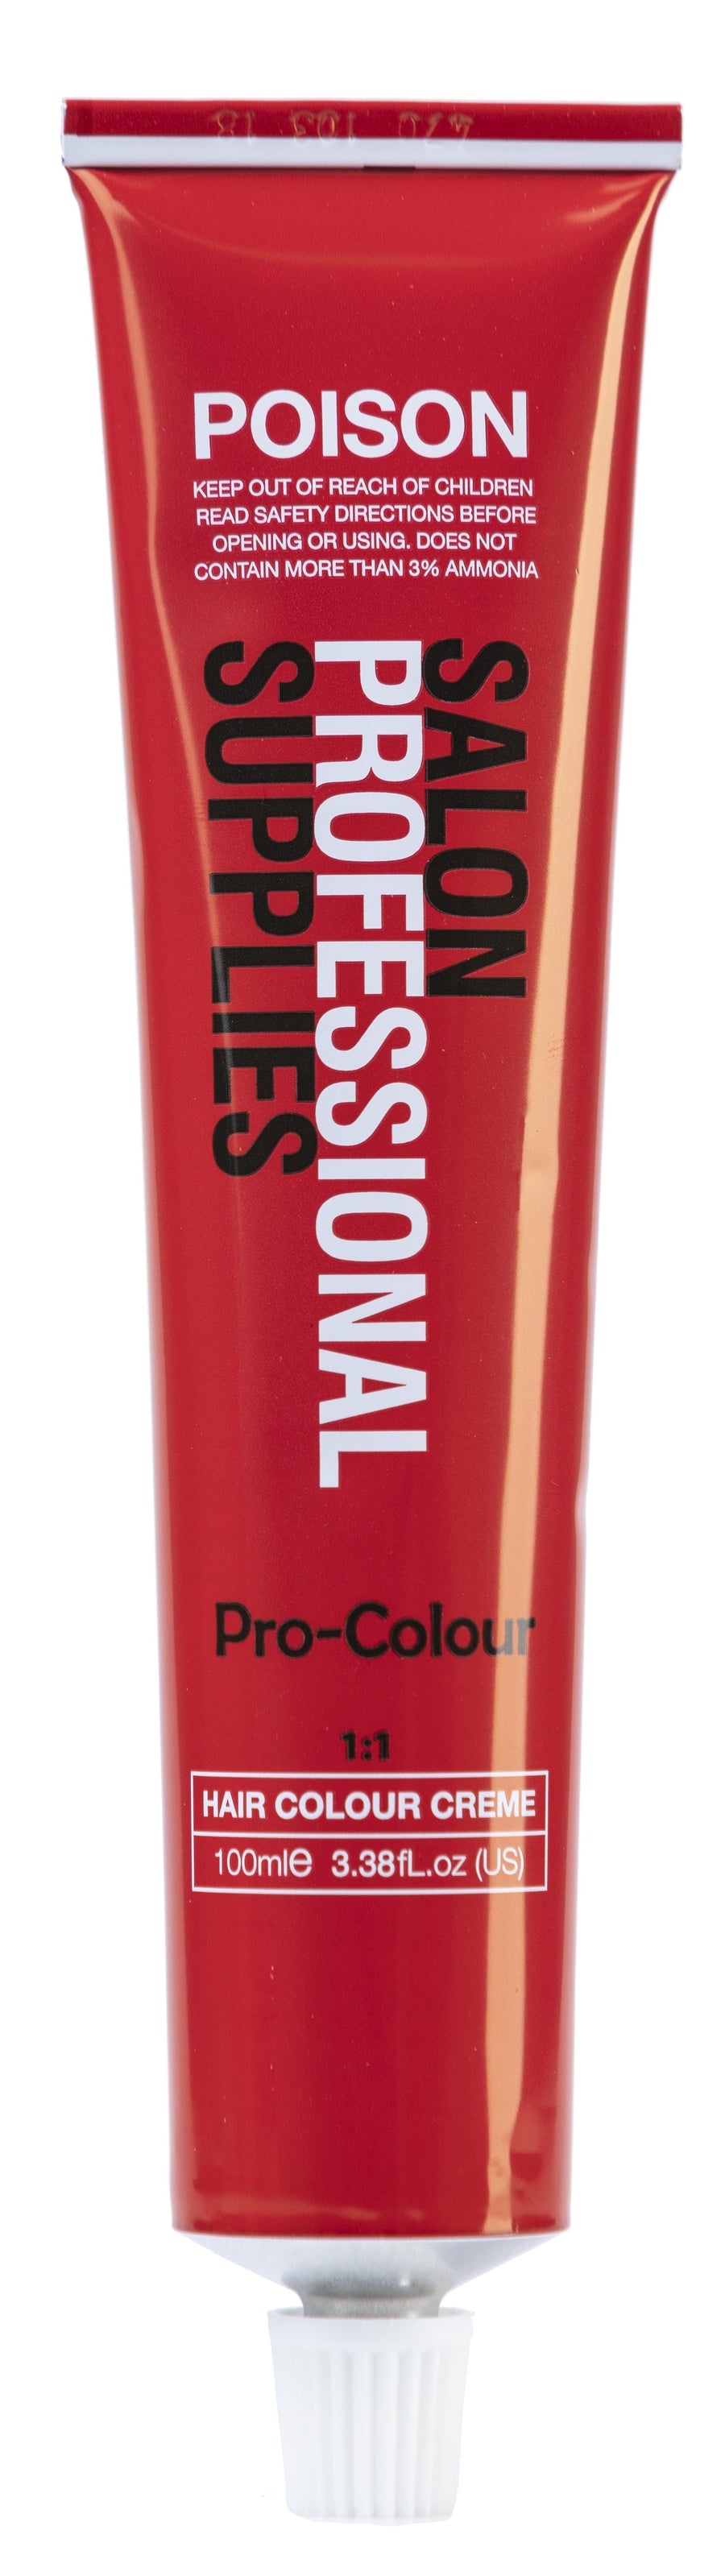 SPS Tint 5.45 Light Copper Mahogany Brown 100ml - Price Attack